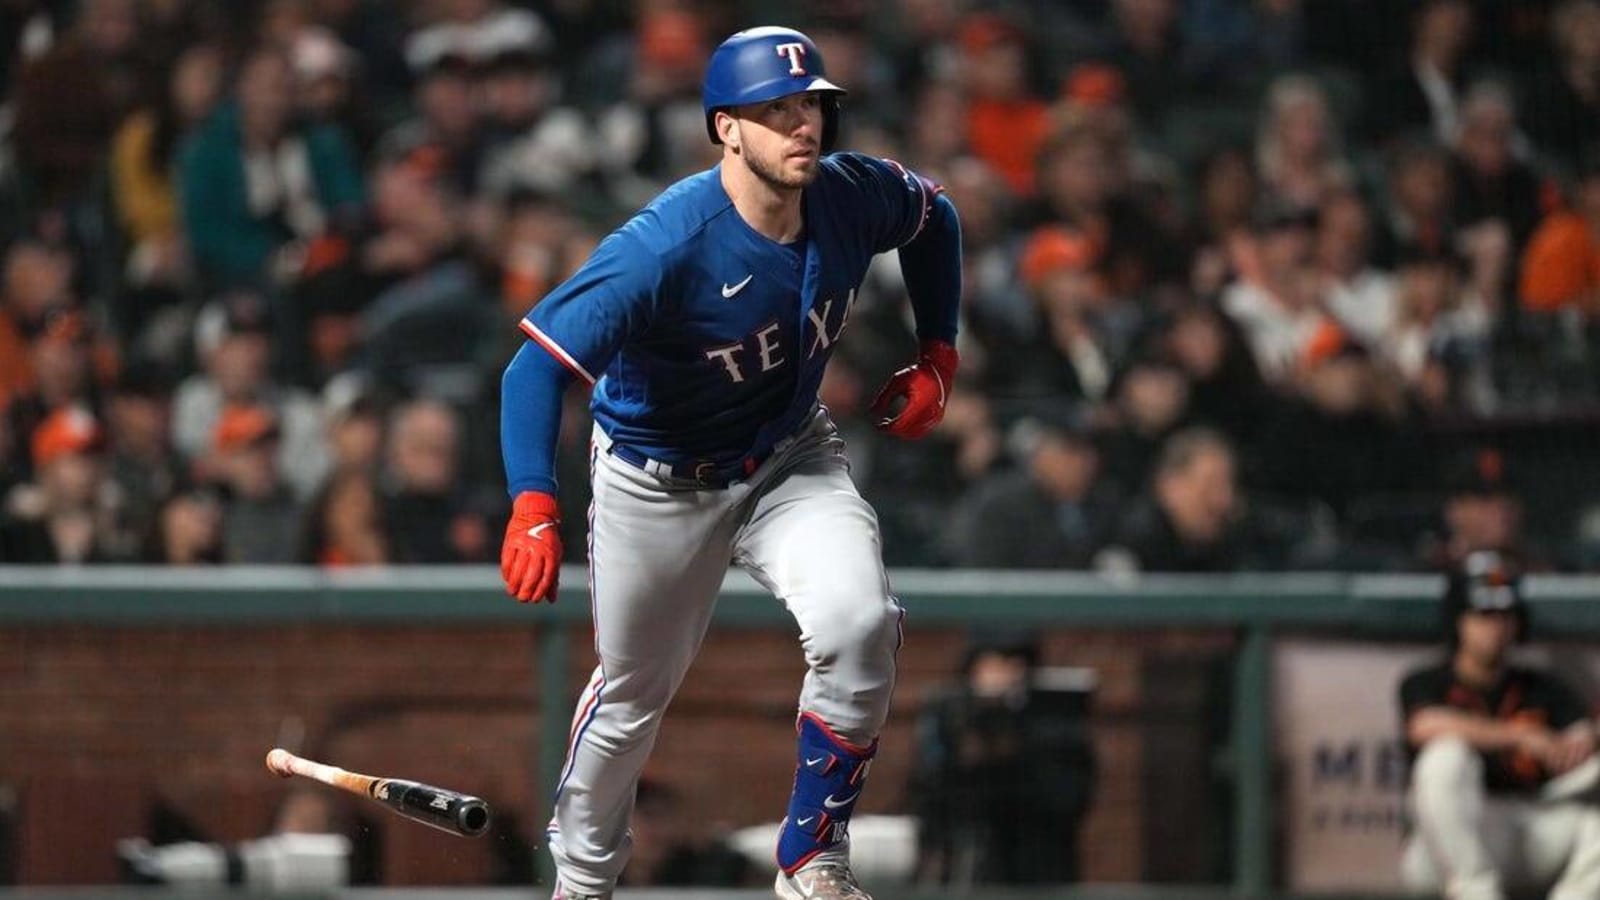 Rangers collect 16 hits in overwhelming Giants